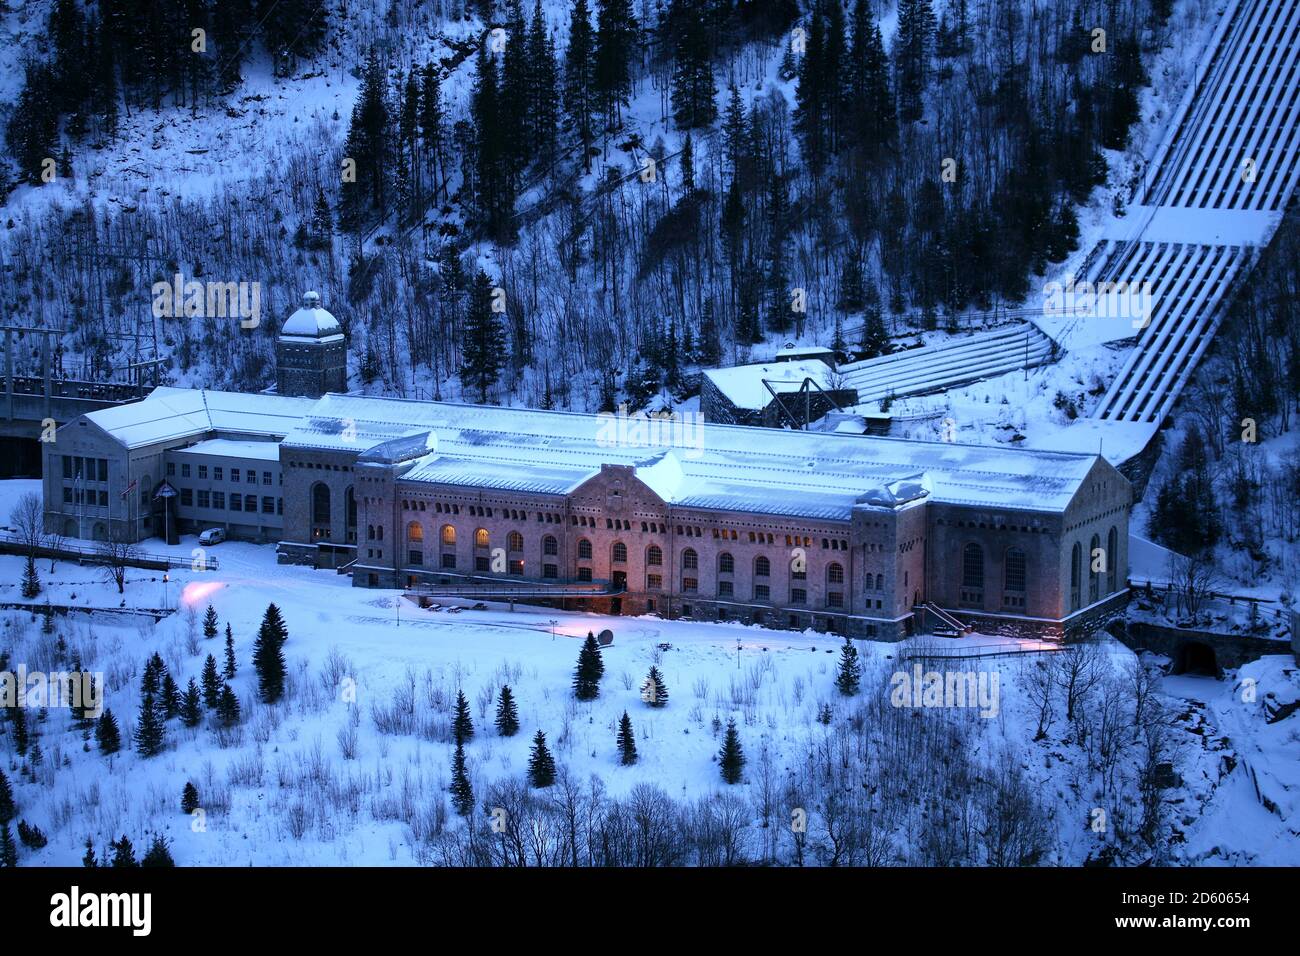 Norway, Rjukan, Vemork hydroelectric plant Stock Photo